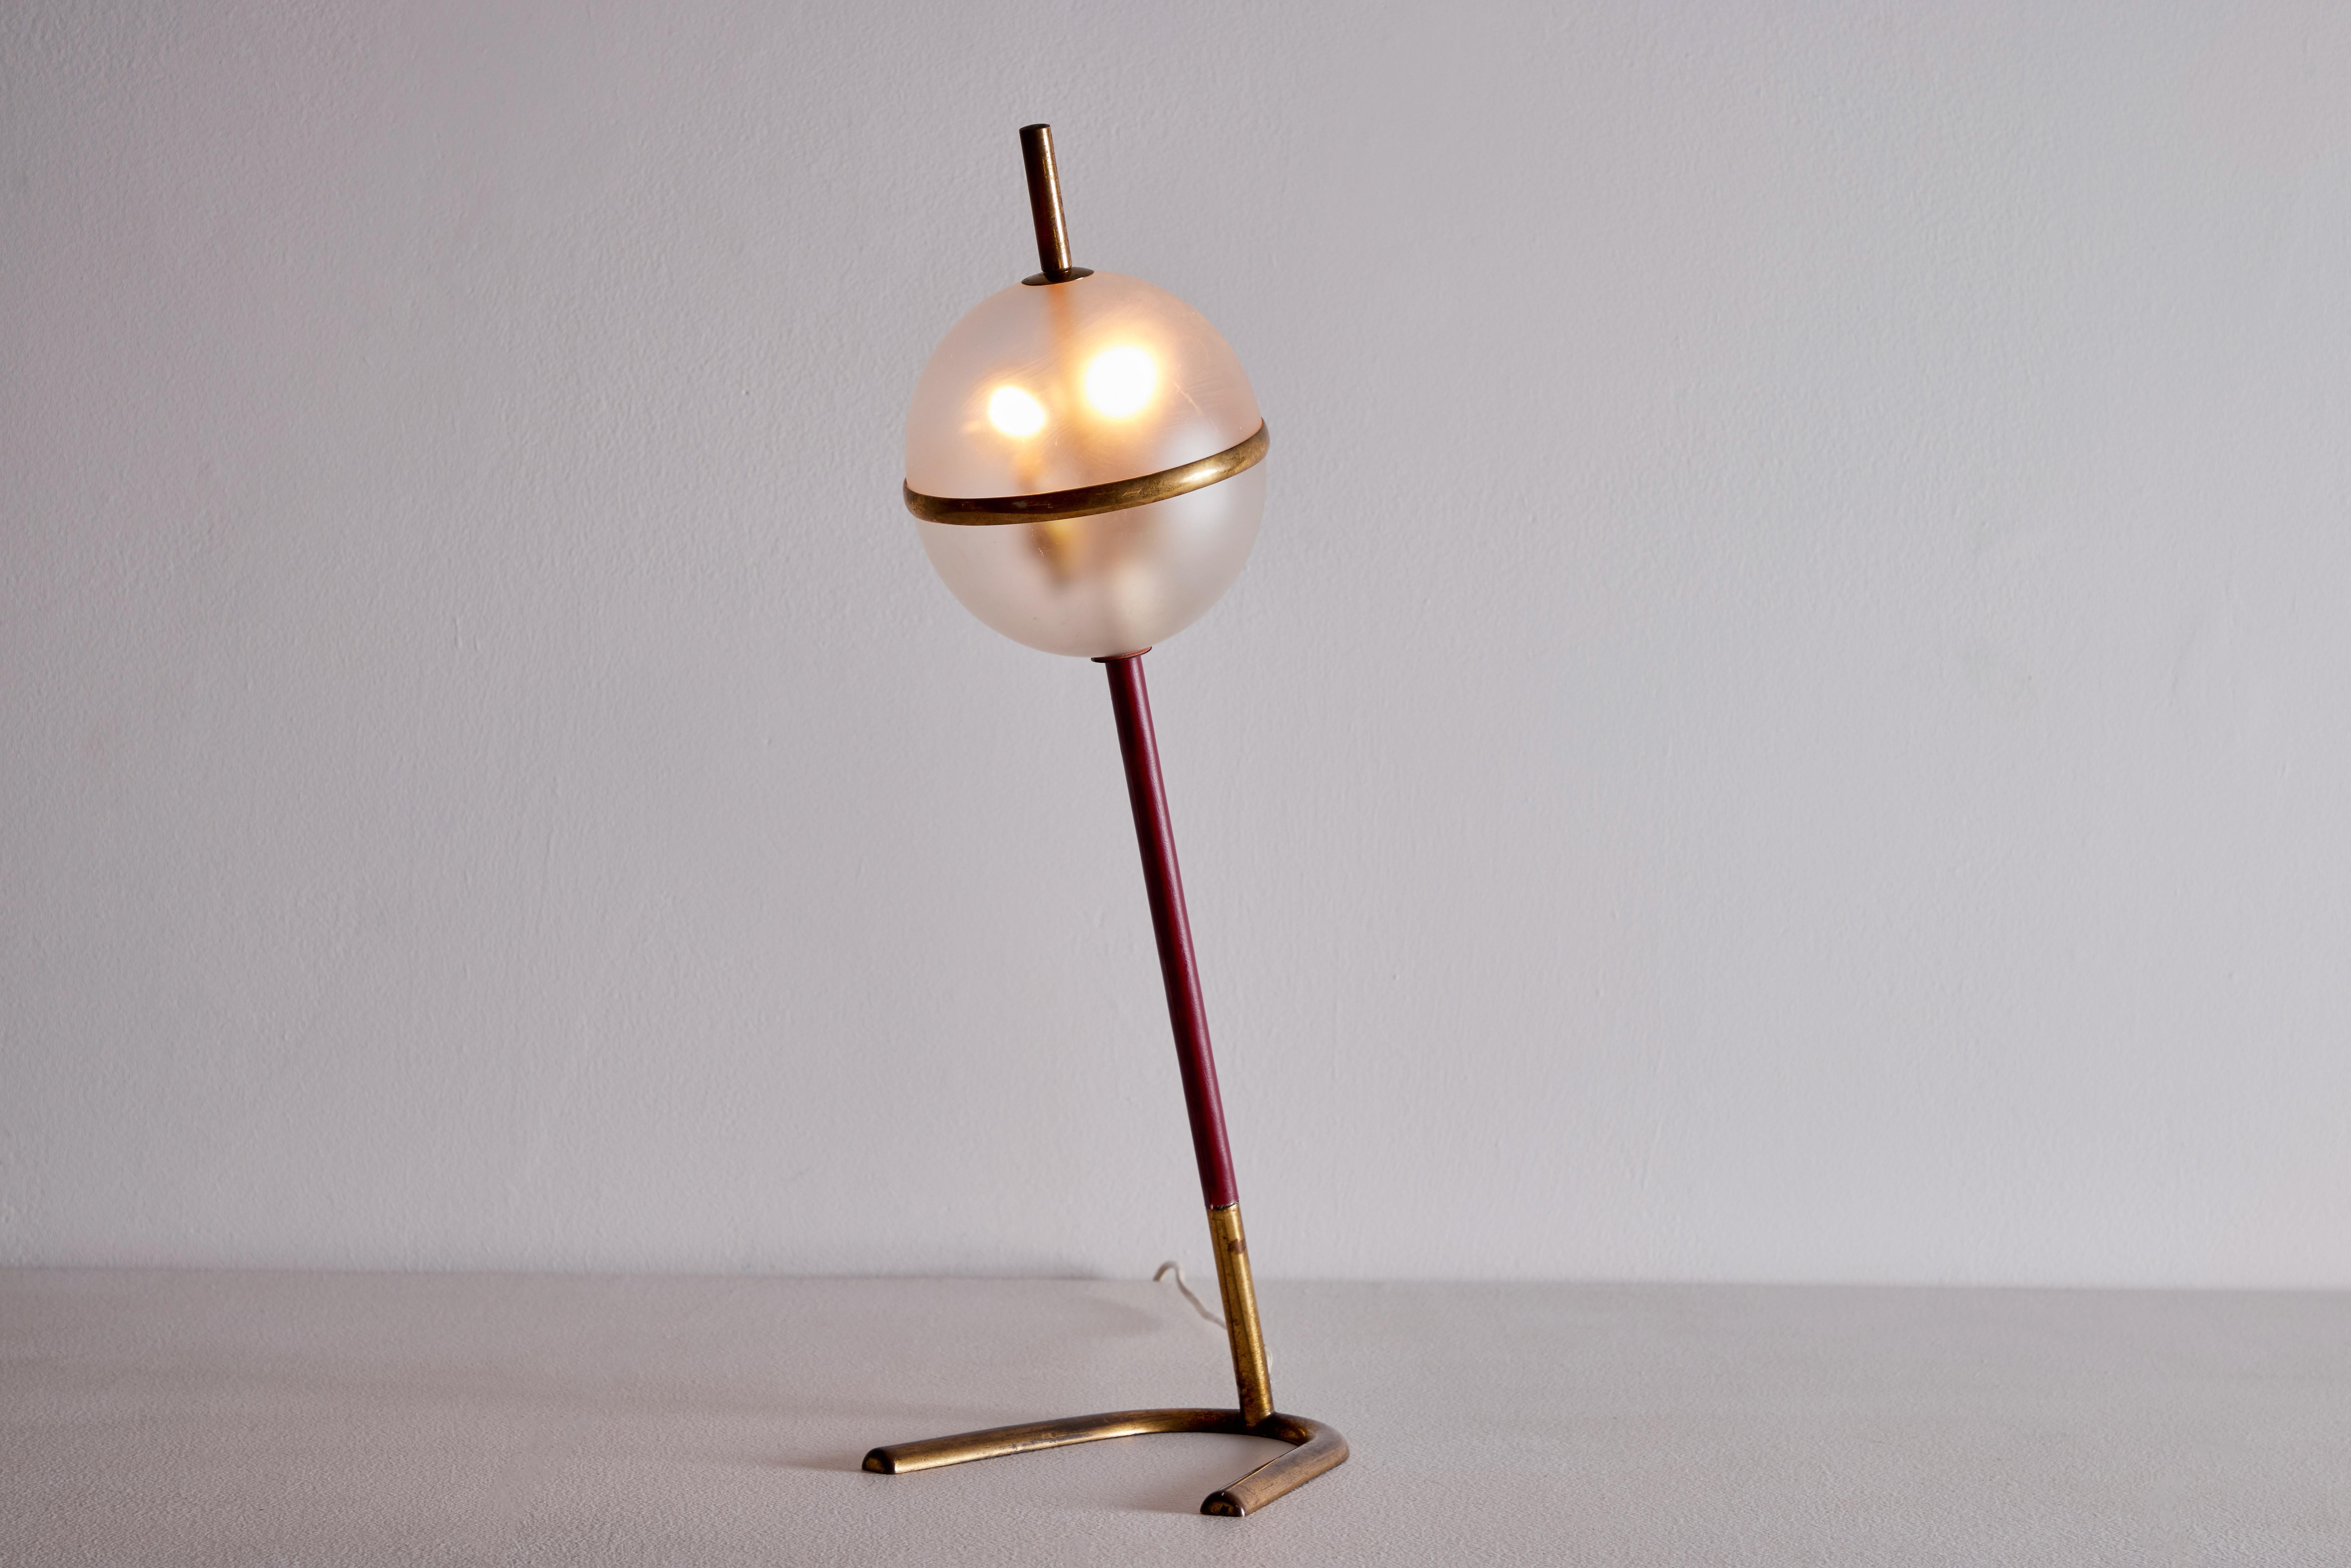 Table lamp manufactured in Italy, circa 1950's by Arredoluce. Brass, leather, glass diffuser. Original European cord. We recommend two E12 candelabra bulbs. Bulbs provided as a one time courtesy. Diameter in measurement is for base of lamp.